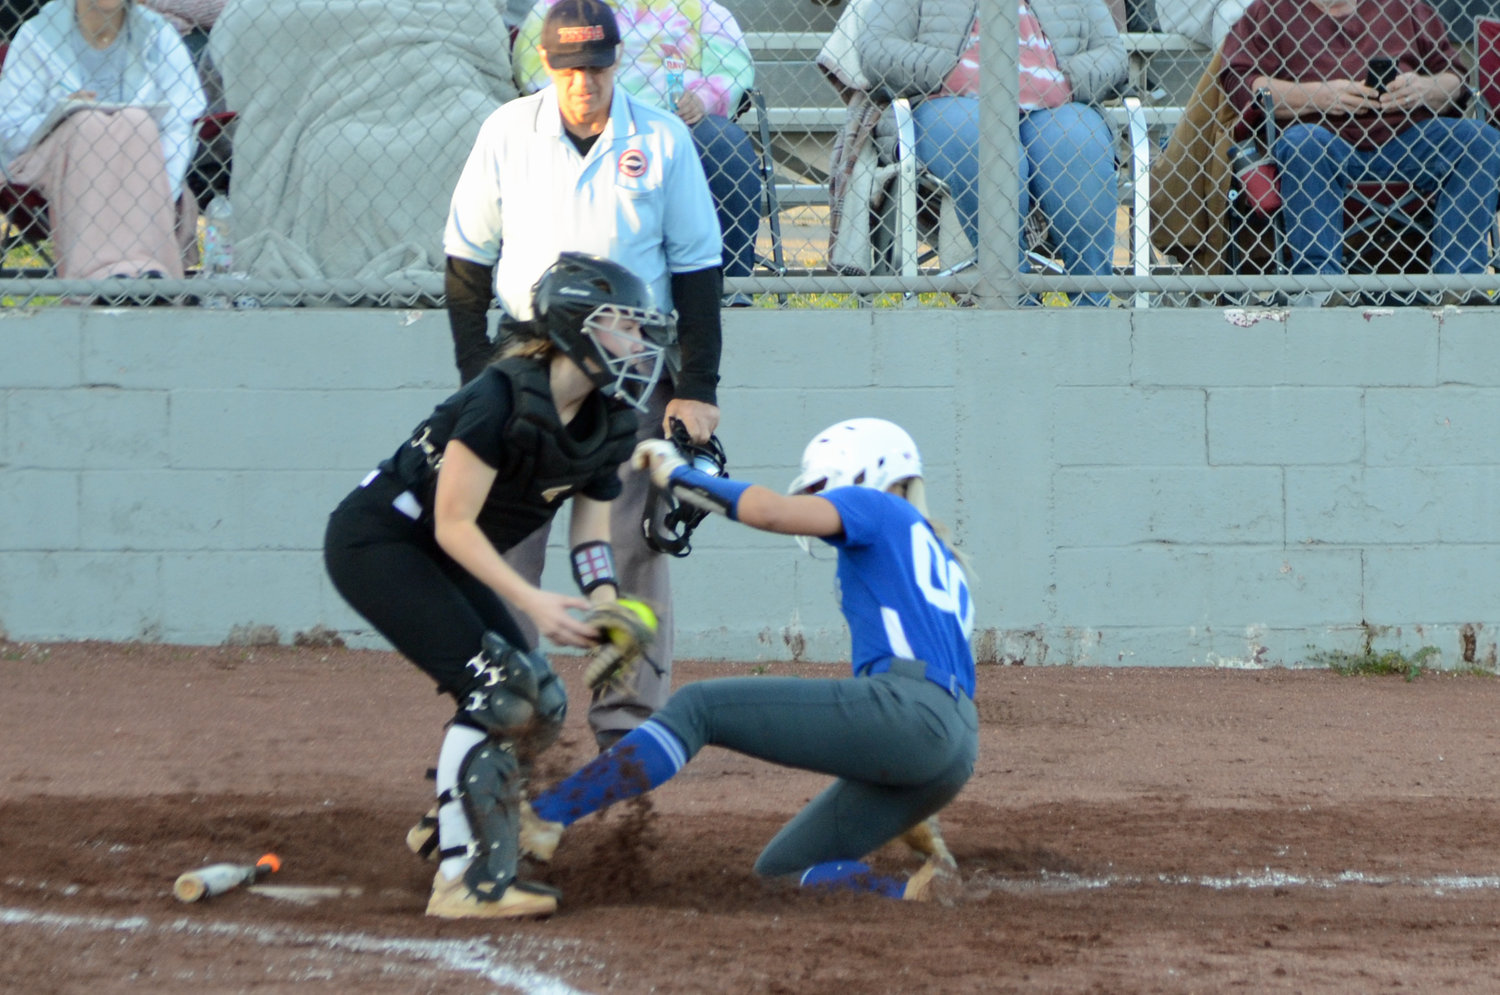 Abby Ferguson slides safely home to tie the game at 3-3 in the top of the third inning.